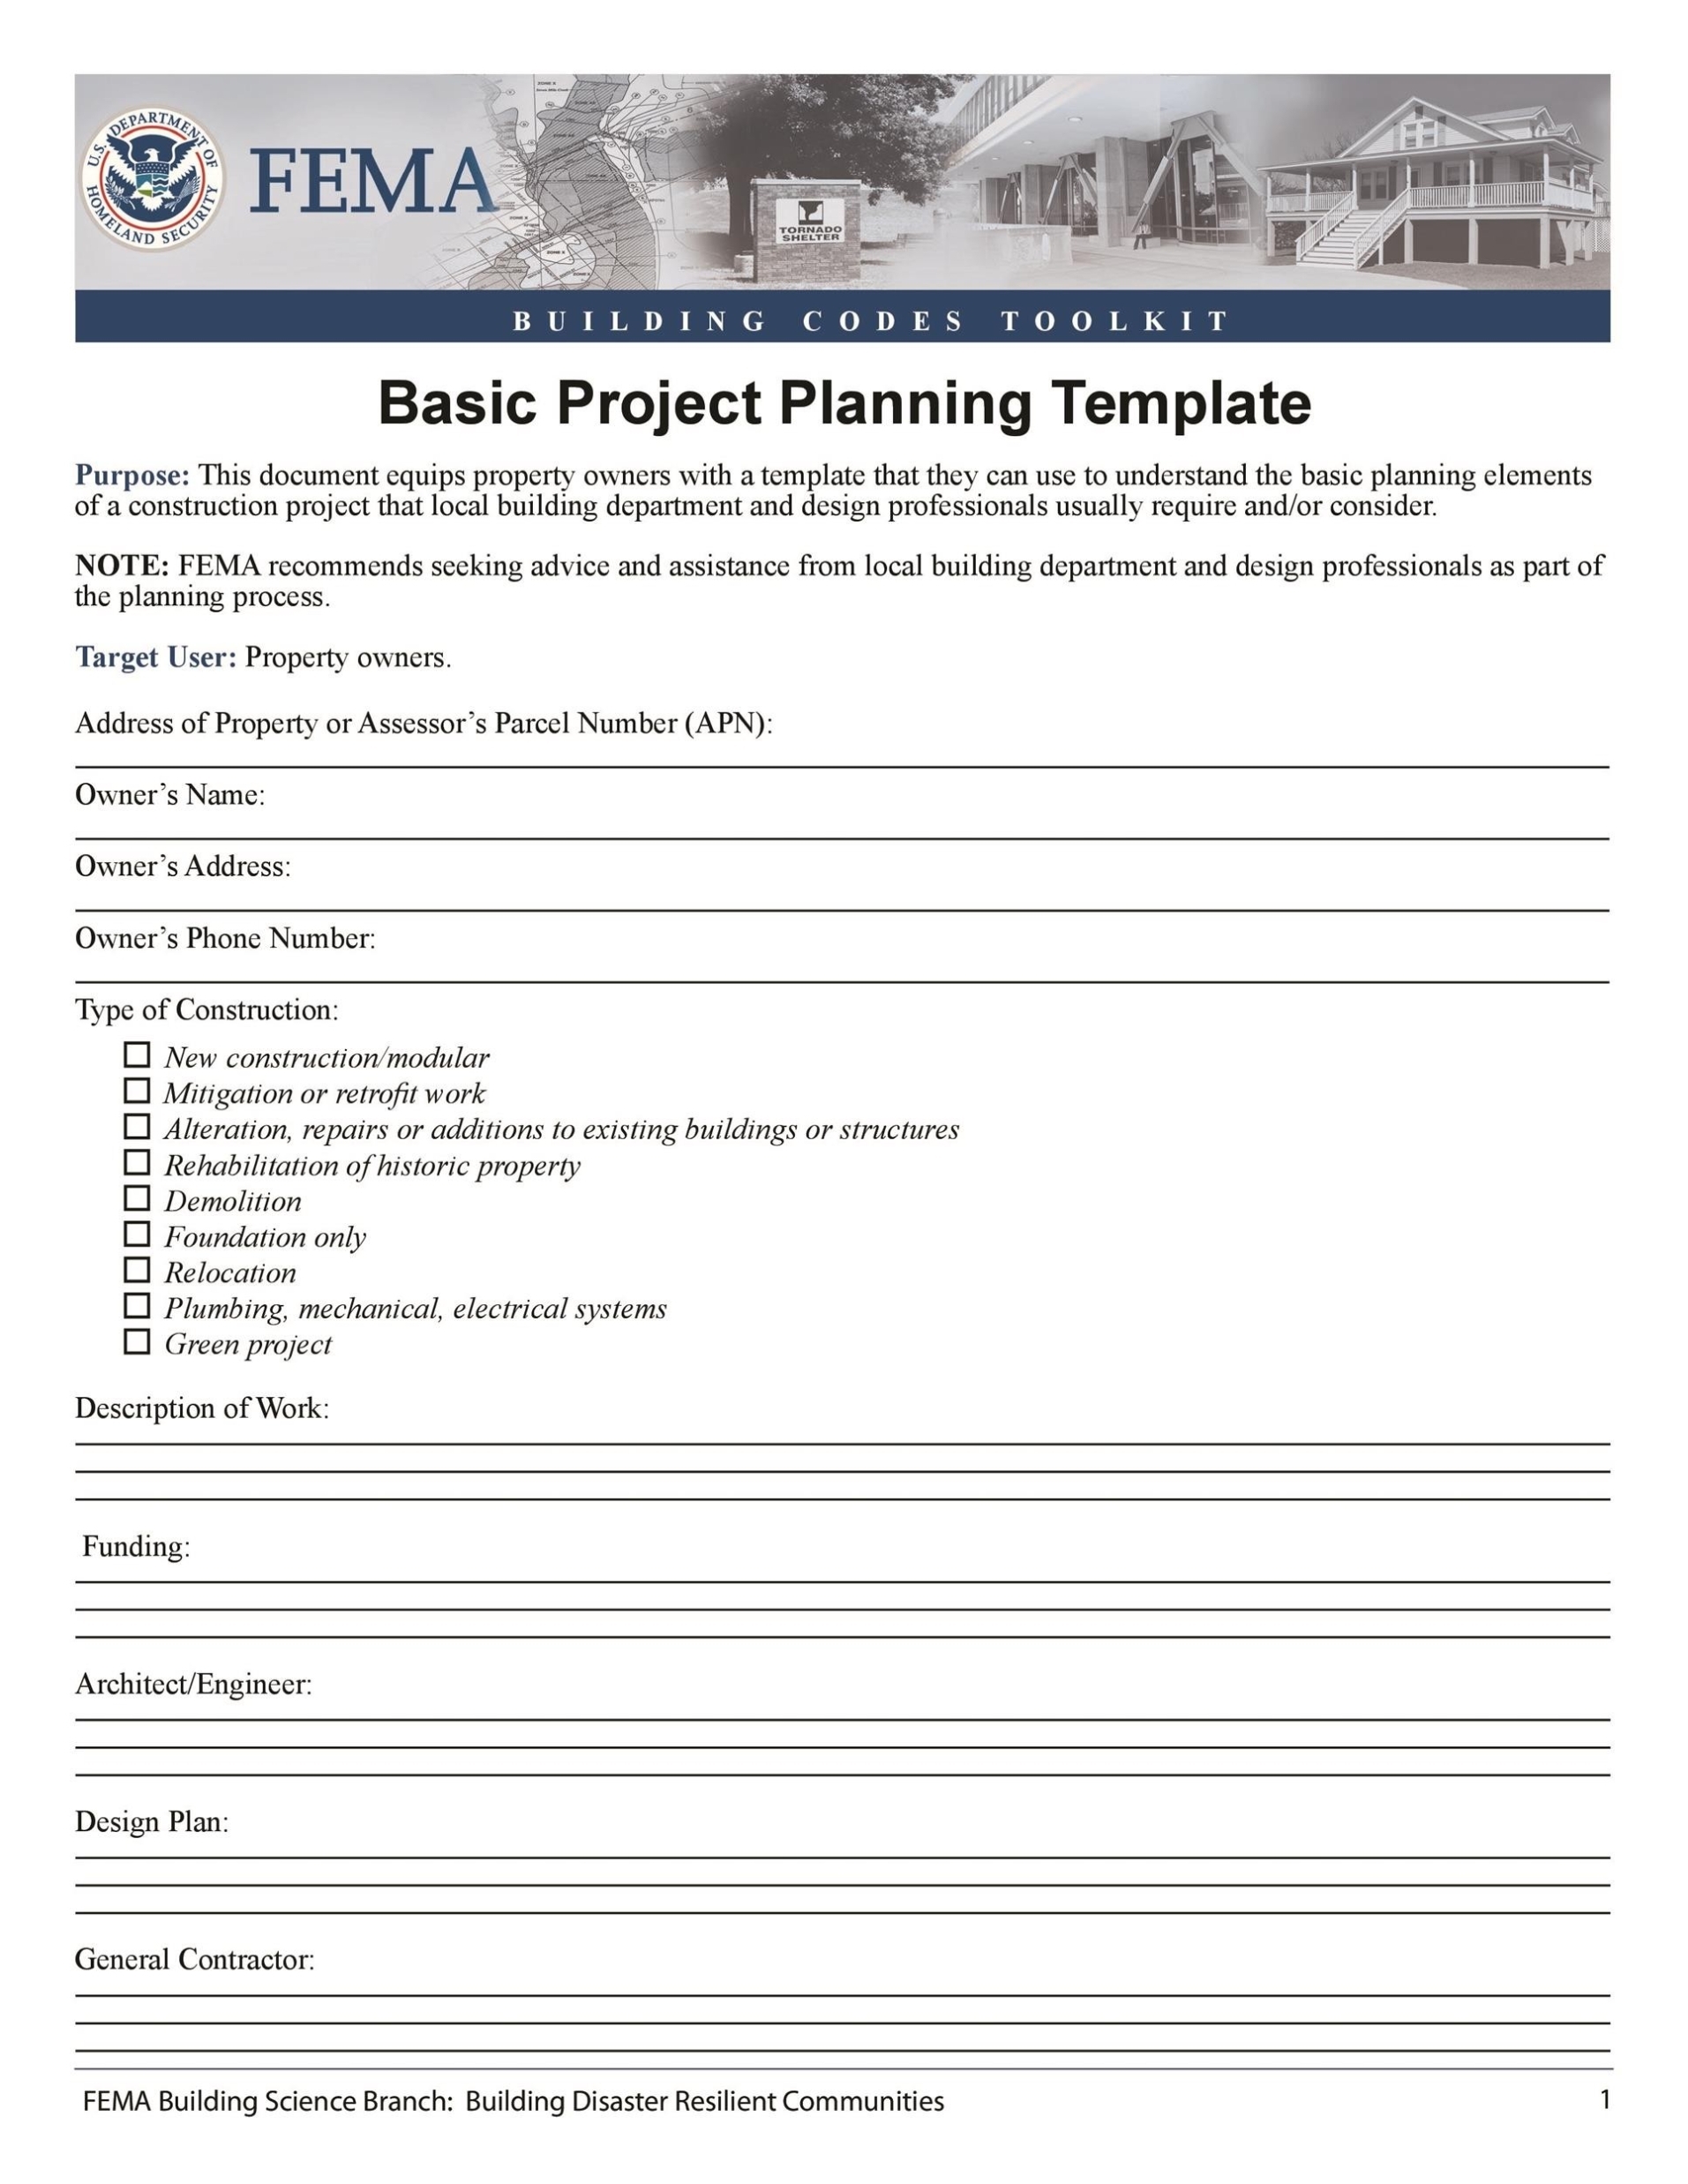 48 Professional Project Plan Templates [Excel, Word, Pdf] - Template Lab Regarding Project Management Proposal Template